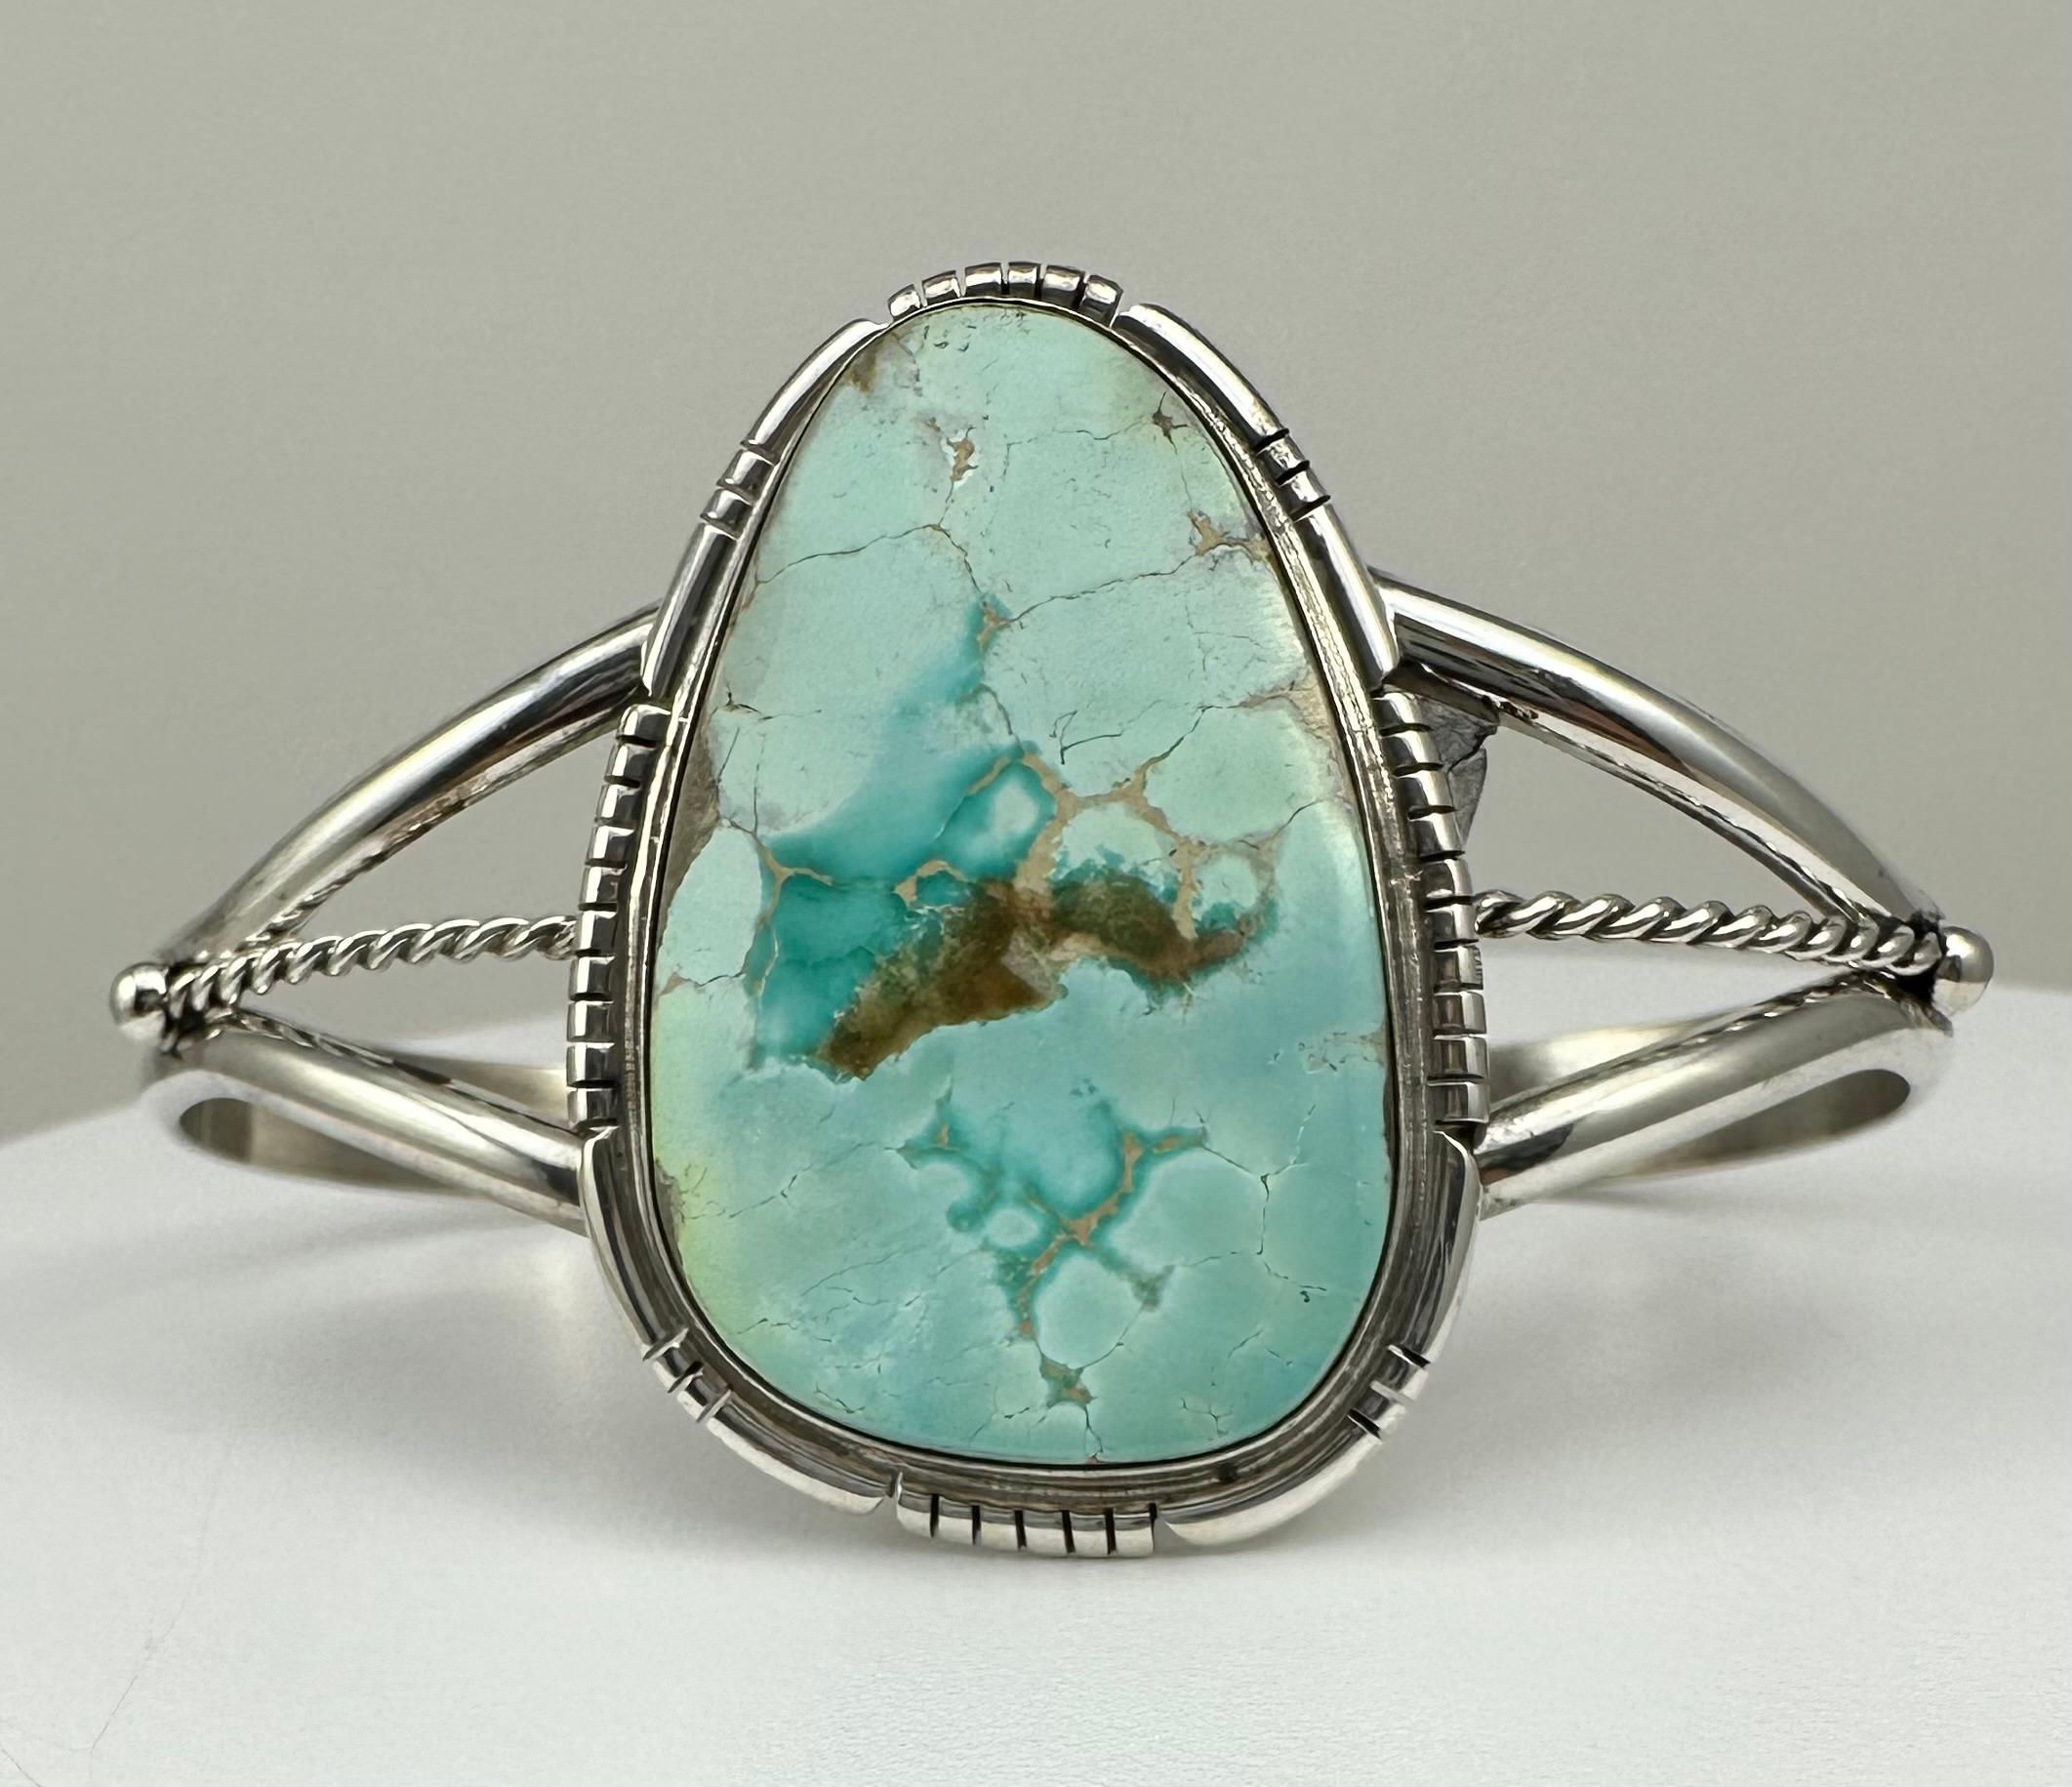 Sterling Silver .925 Kingman Turquoise Cuff Bracelet 
Signed by Navajo Artist by Dave Skeets
Measures approximately:
2 1/2